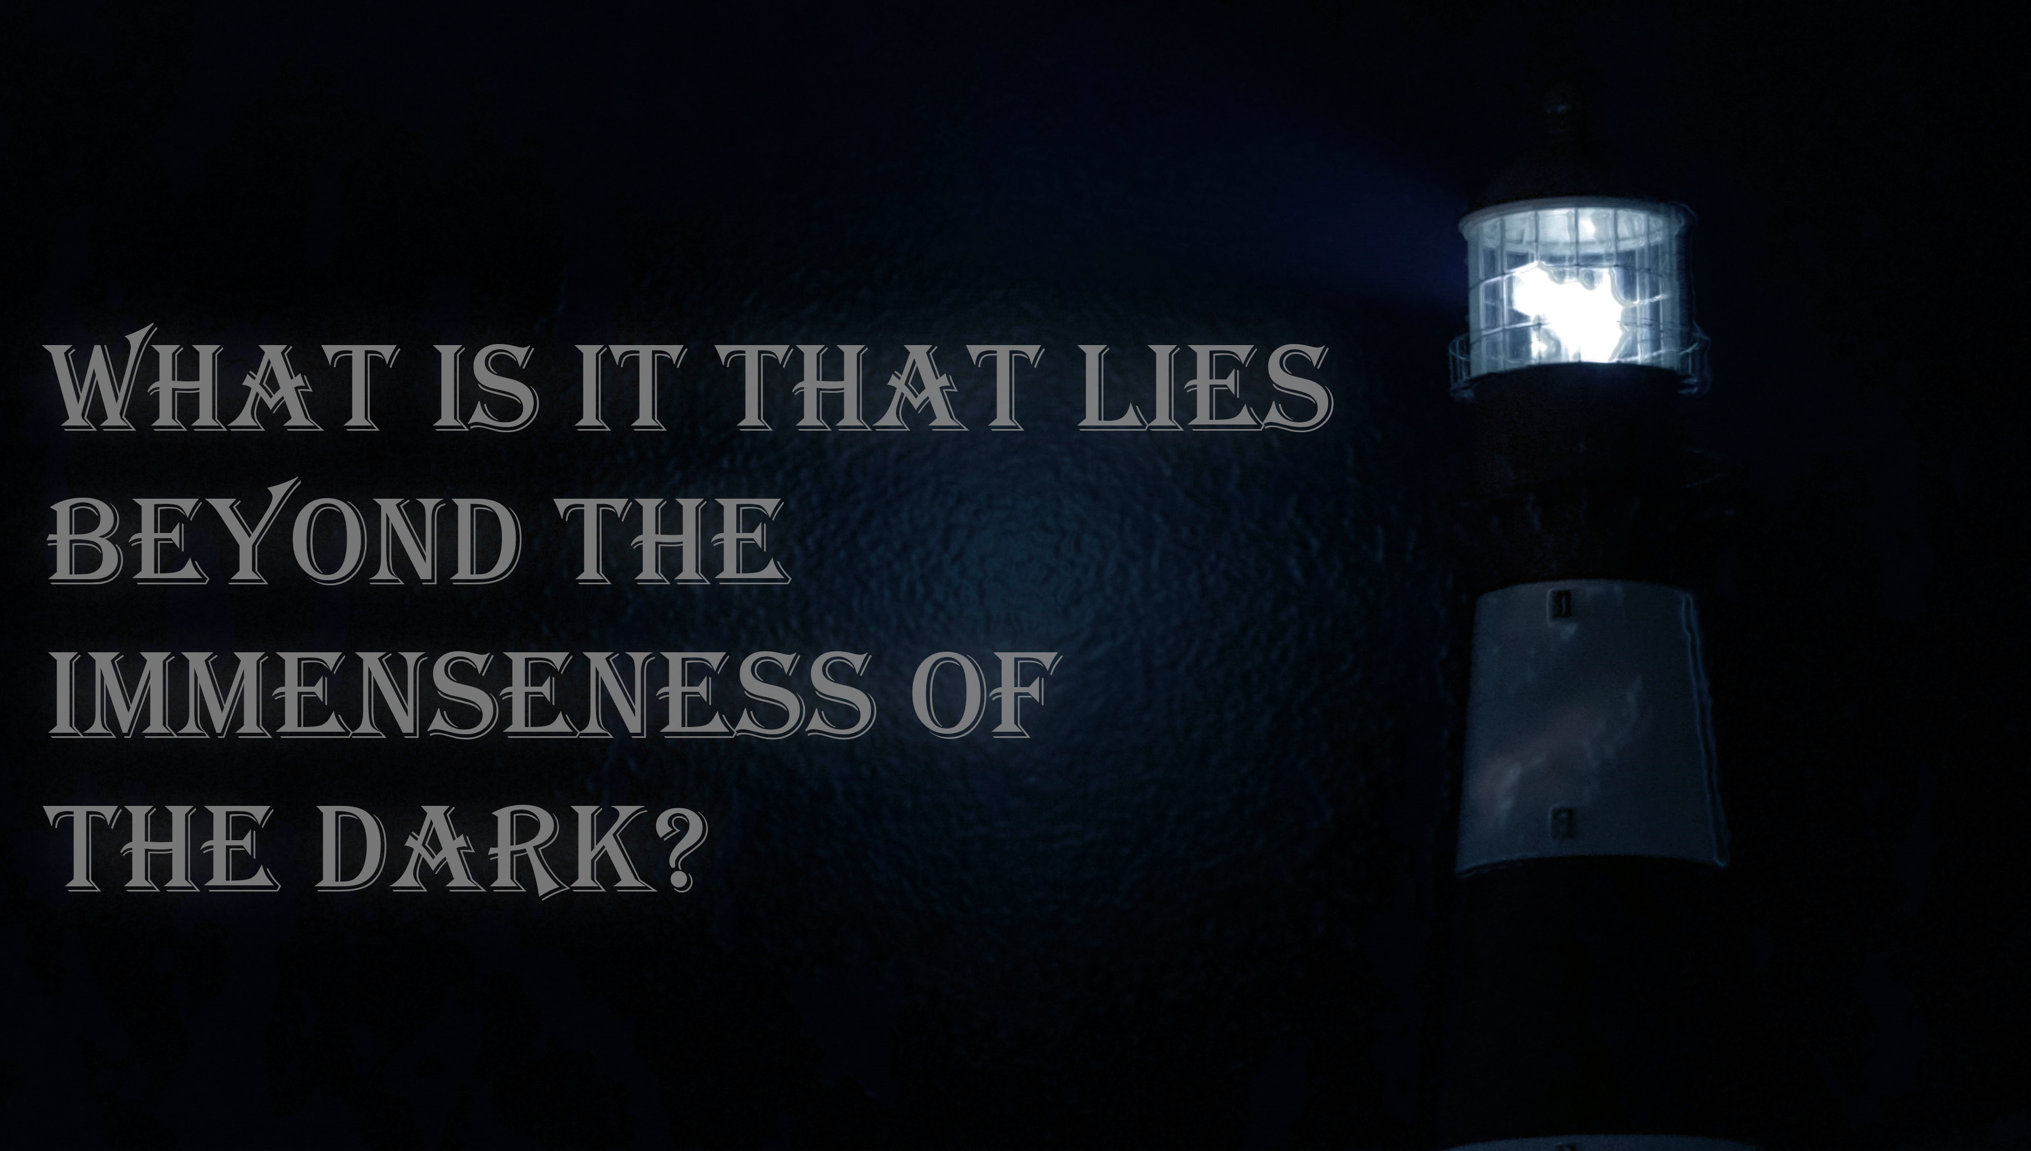 What Is It That Lies Beyond The Immenseness of the Dark?